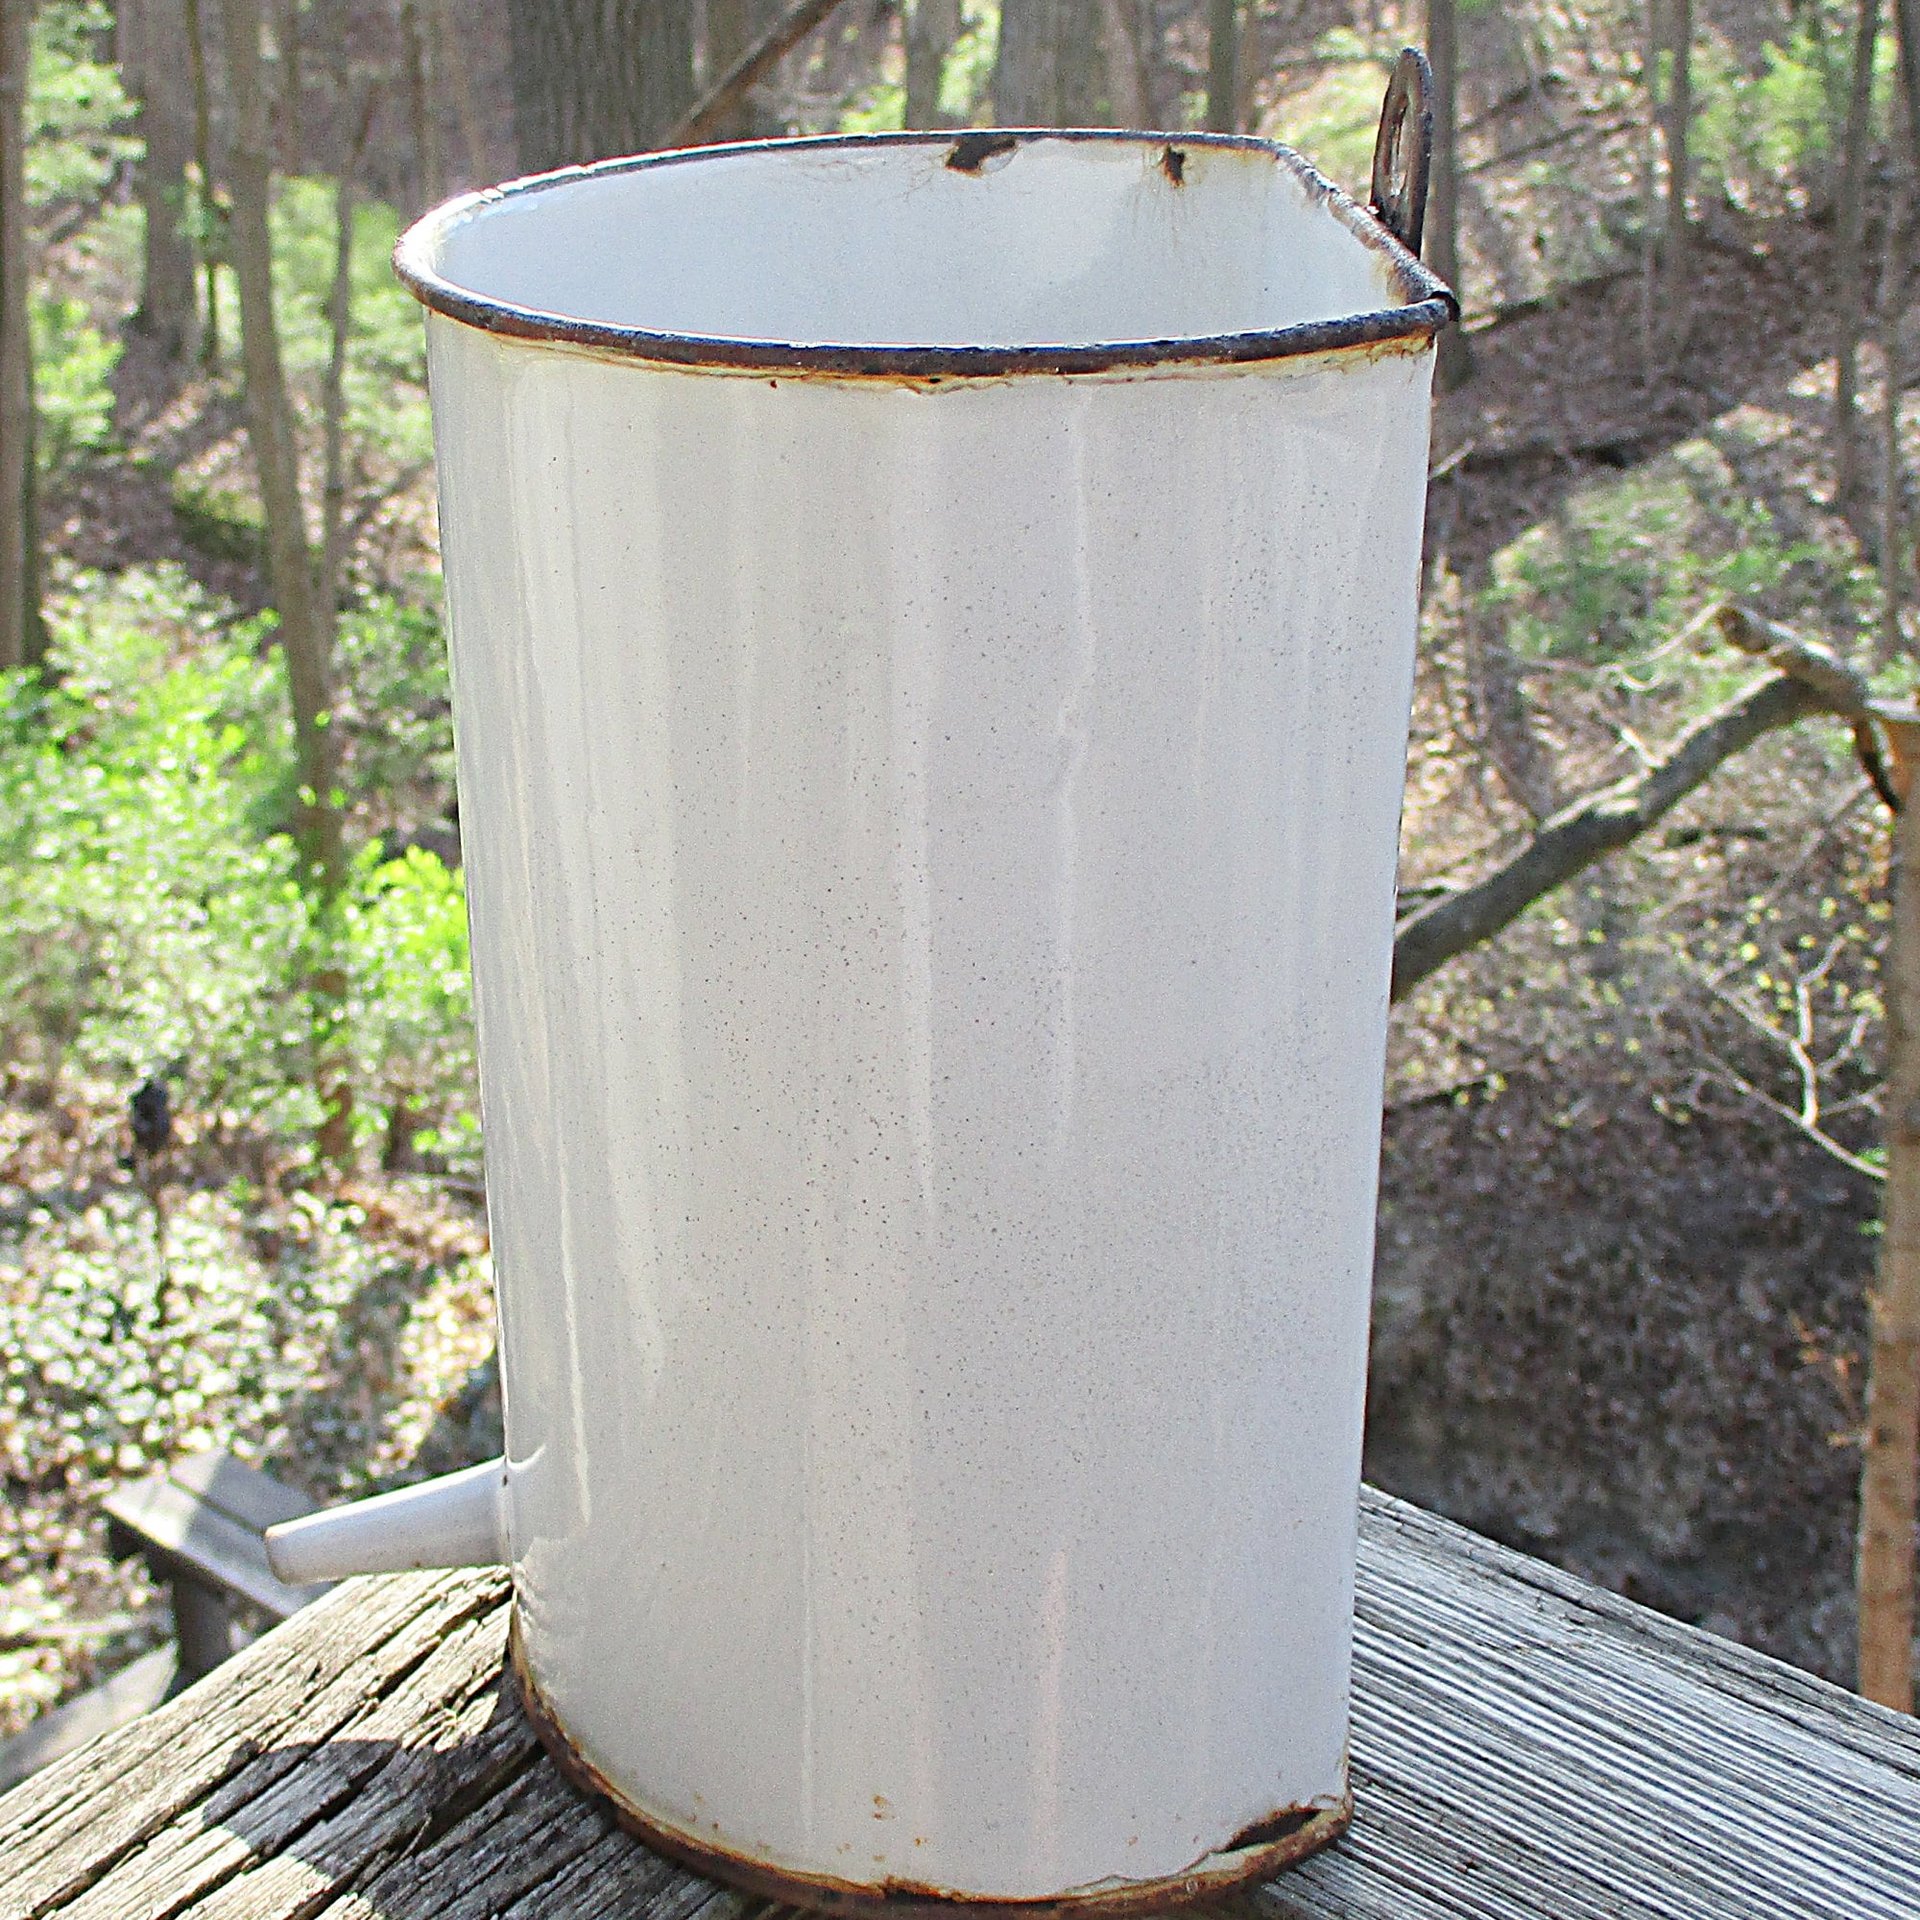 Enamelware Medical Container with Spout, White, Hook for Mounting on Wall, Rustic or Primitive Kitchen Decor or Storage